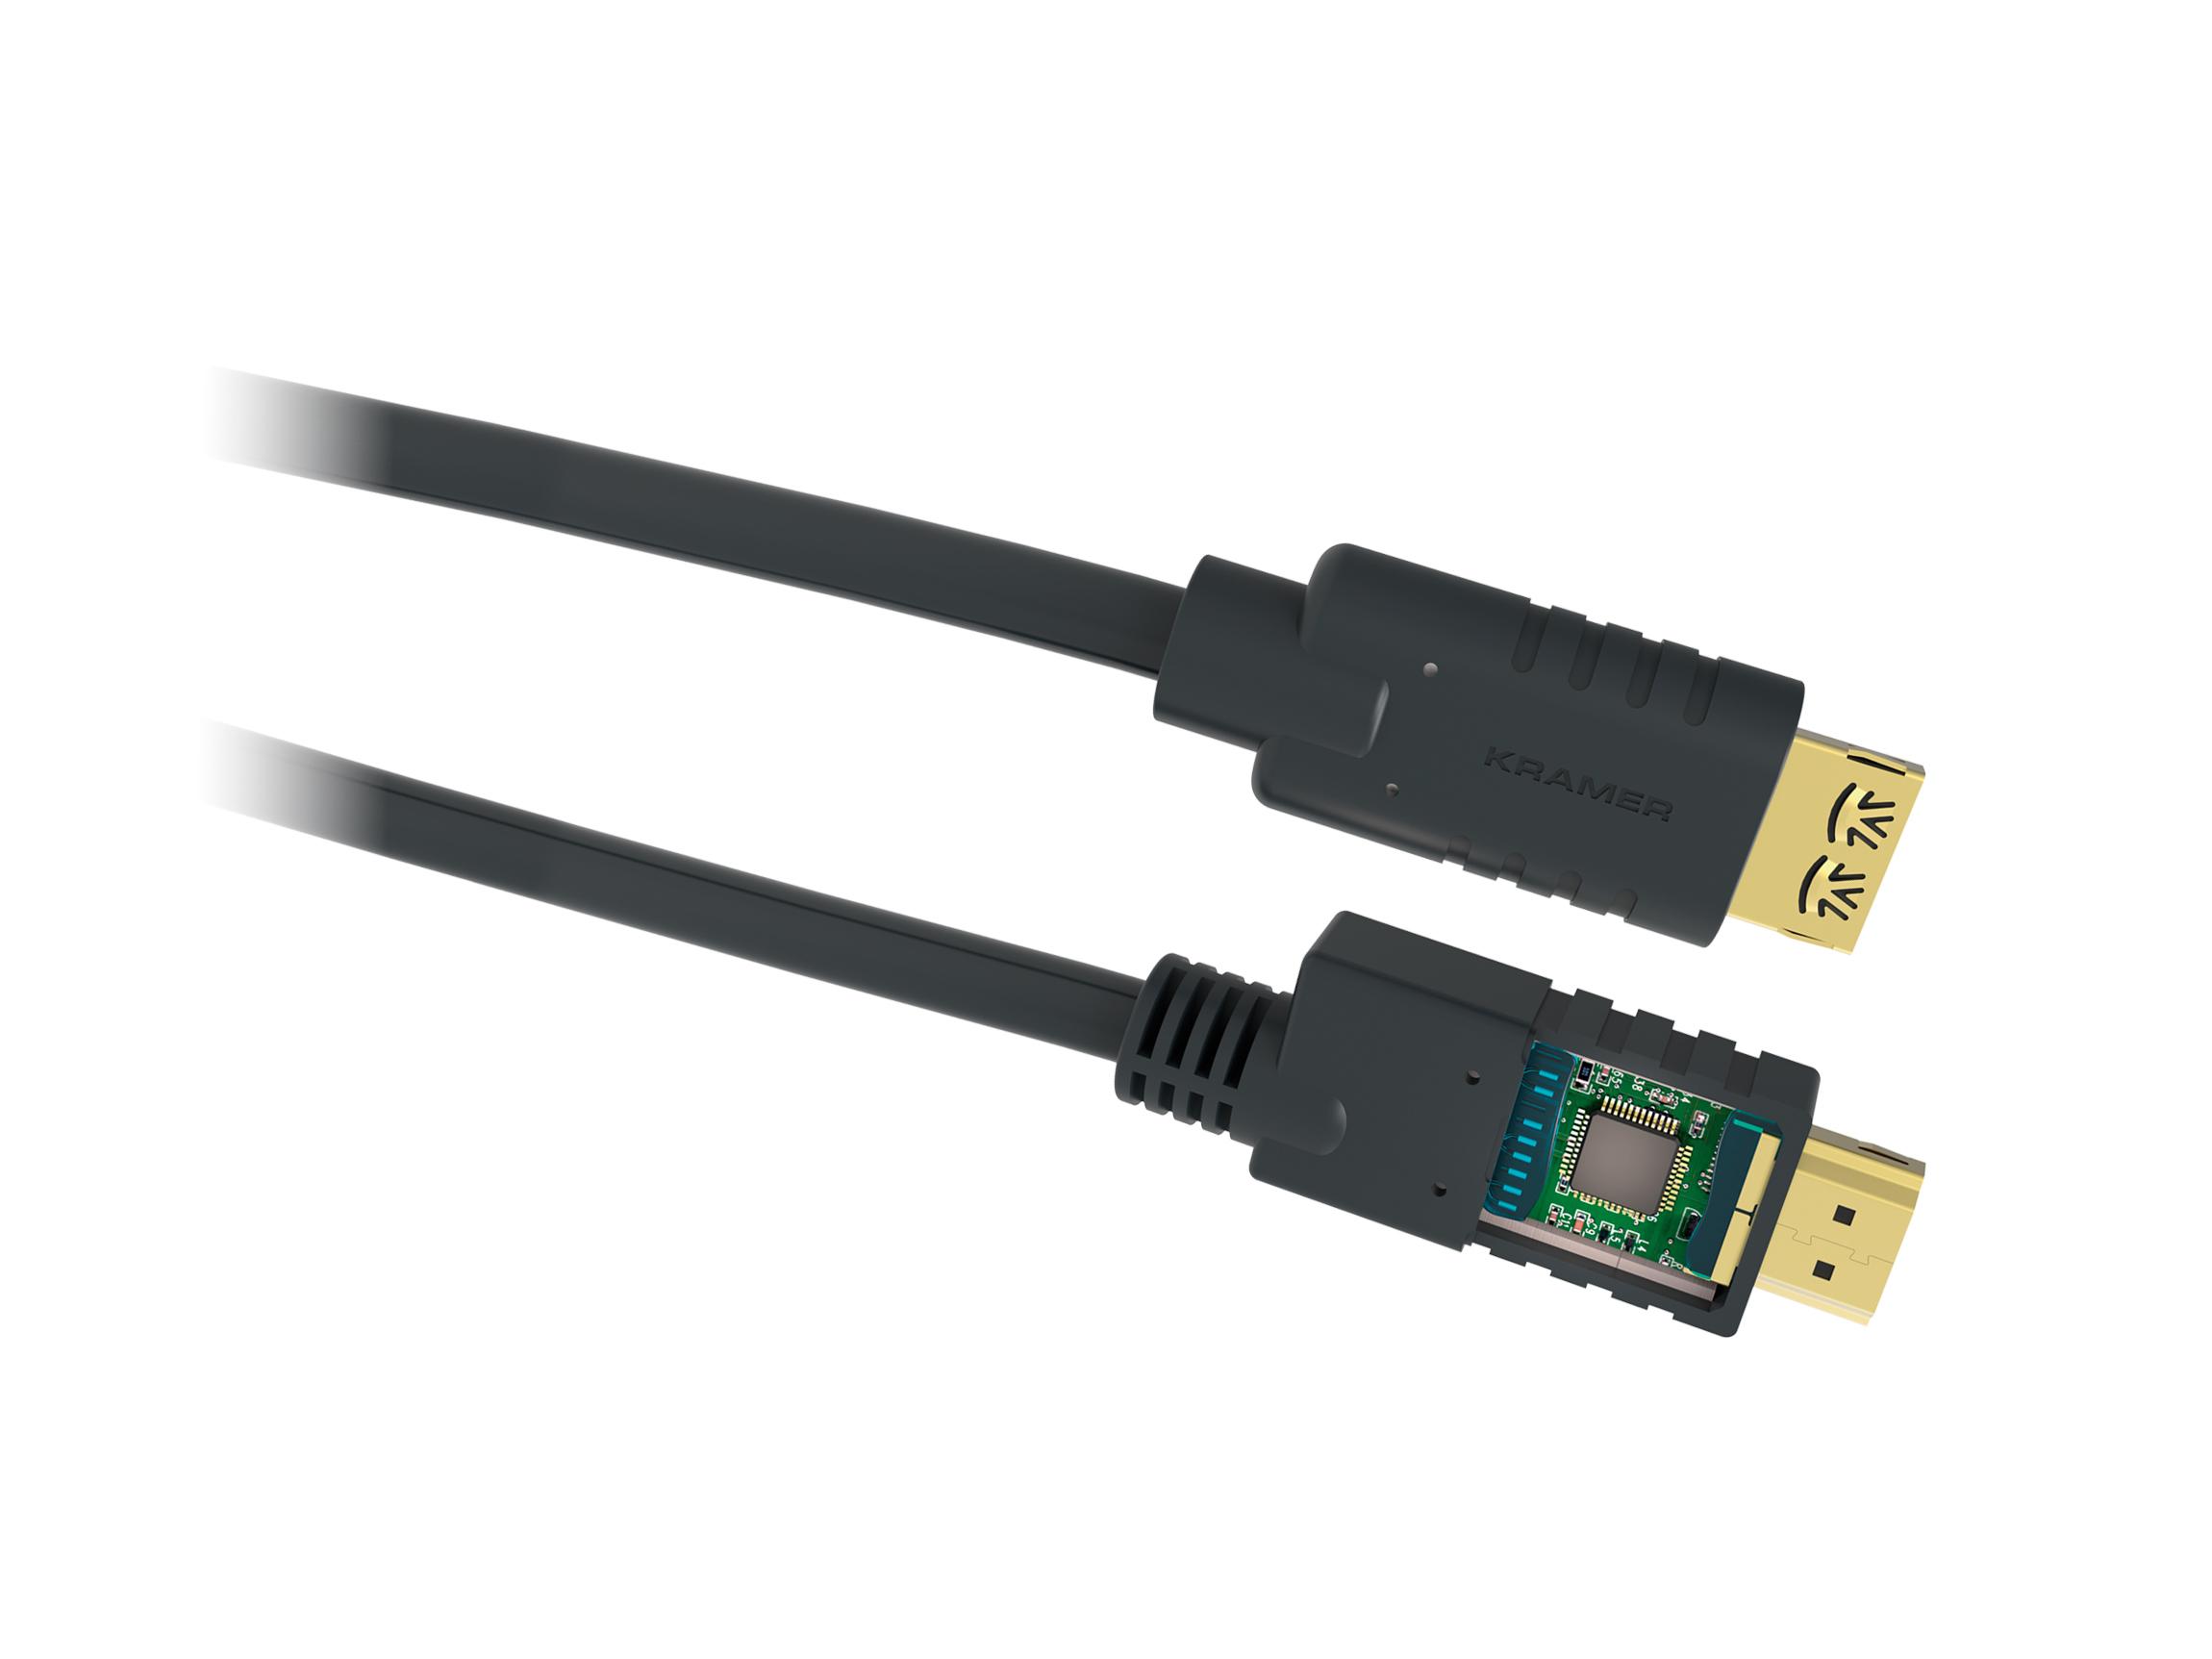 CA-HM-66 Active High Speed HDMI Cable with Ethernet - 66ft by Kramer